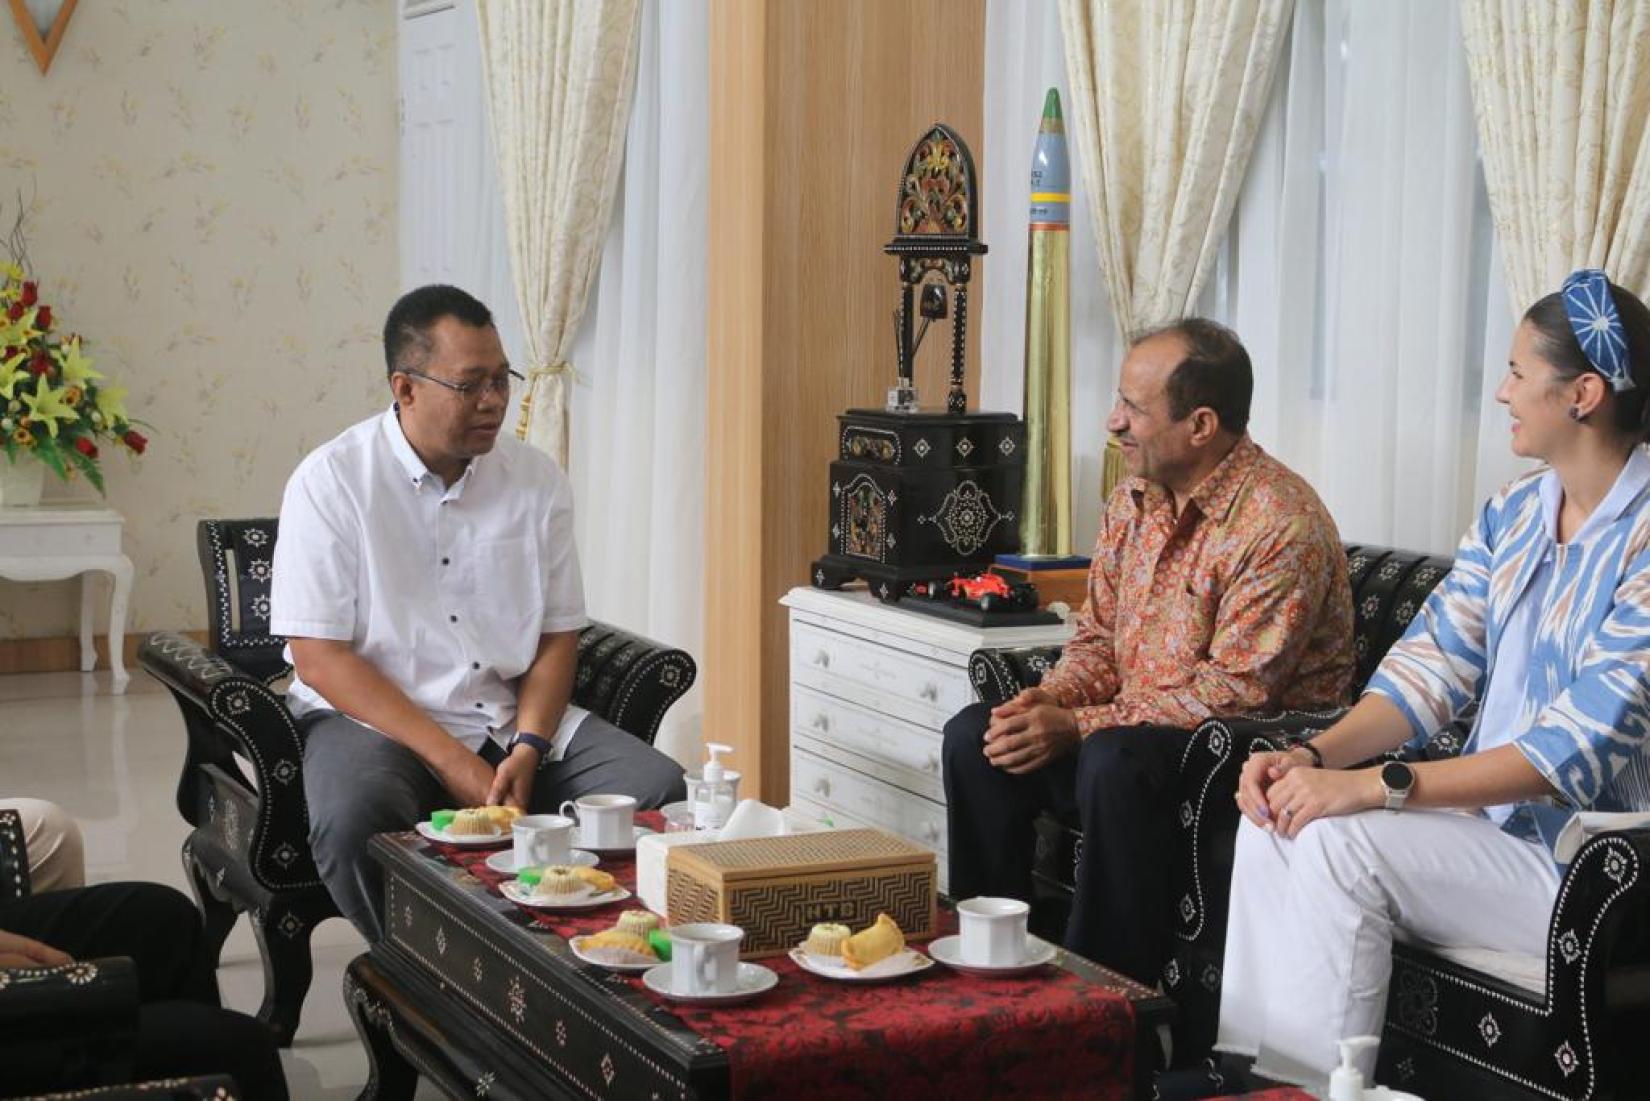 Hearing with the Governor of West Nusa Tenggara, Mr. Zulkieflimansyah, prior to SMEs technical assistance project launching in Lombok